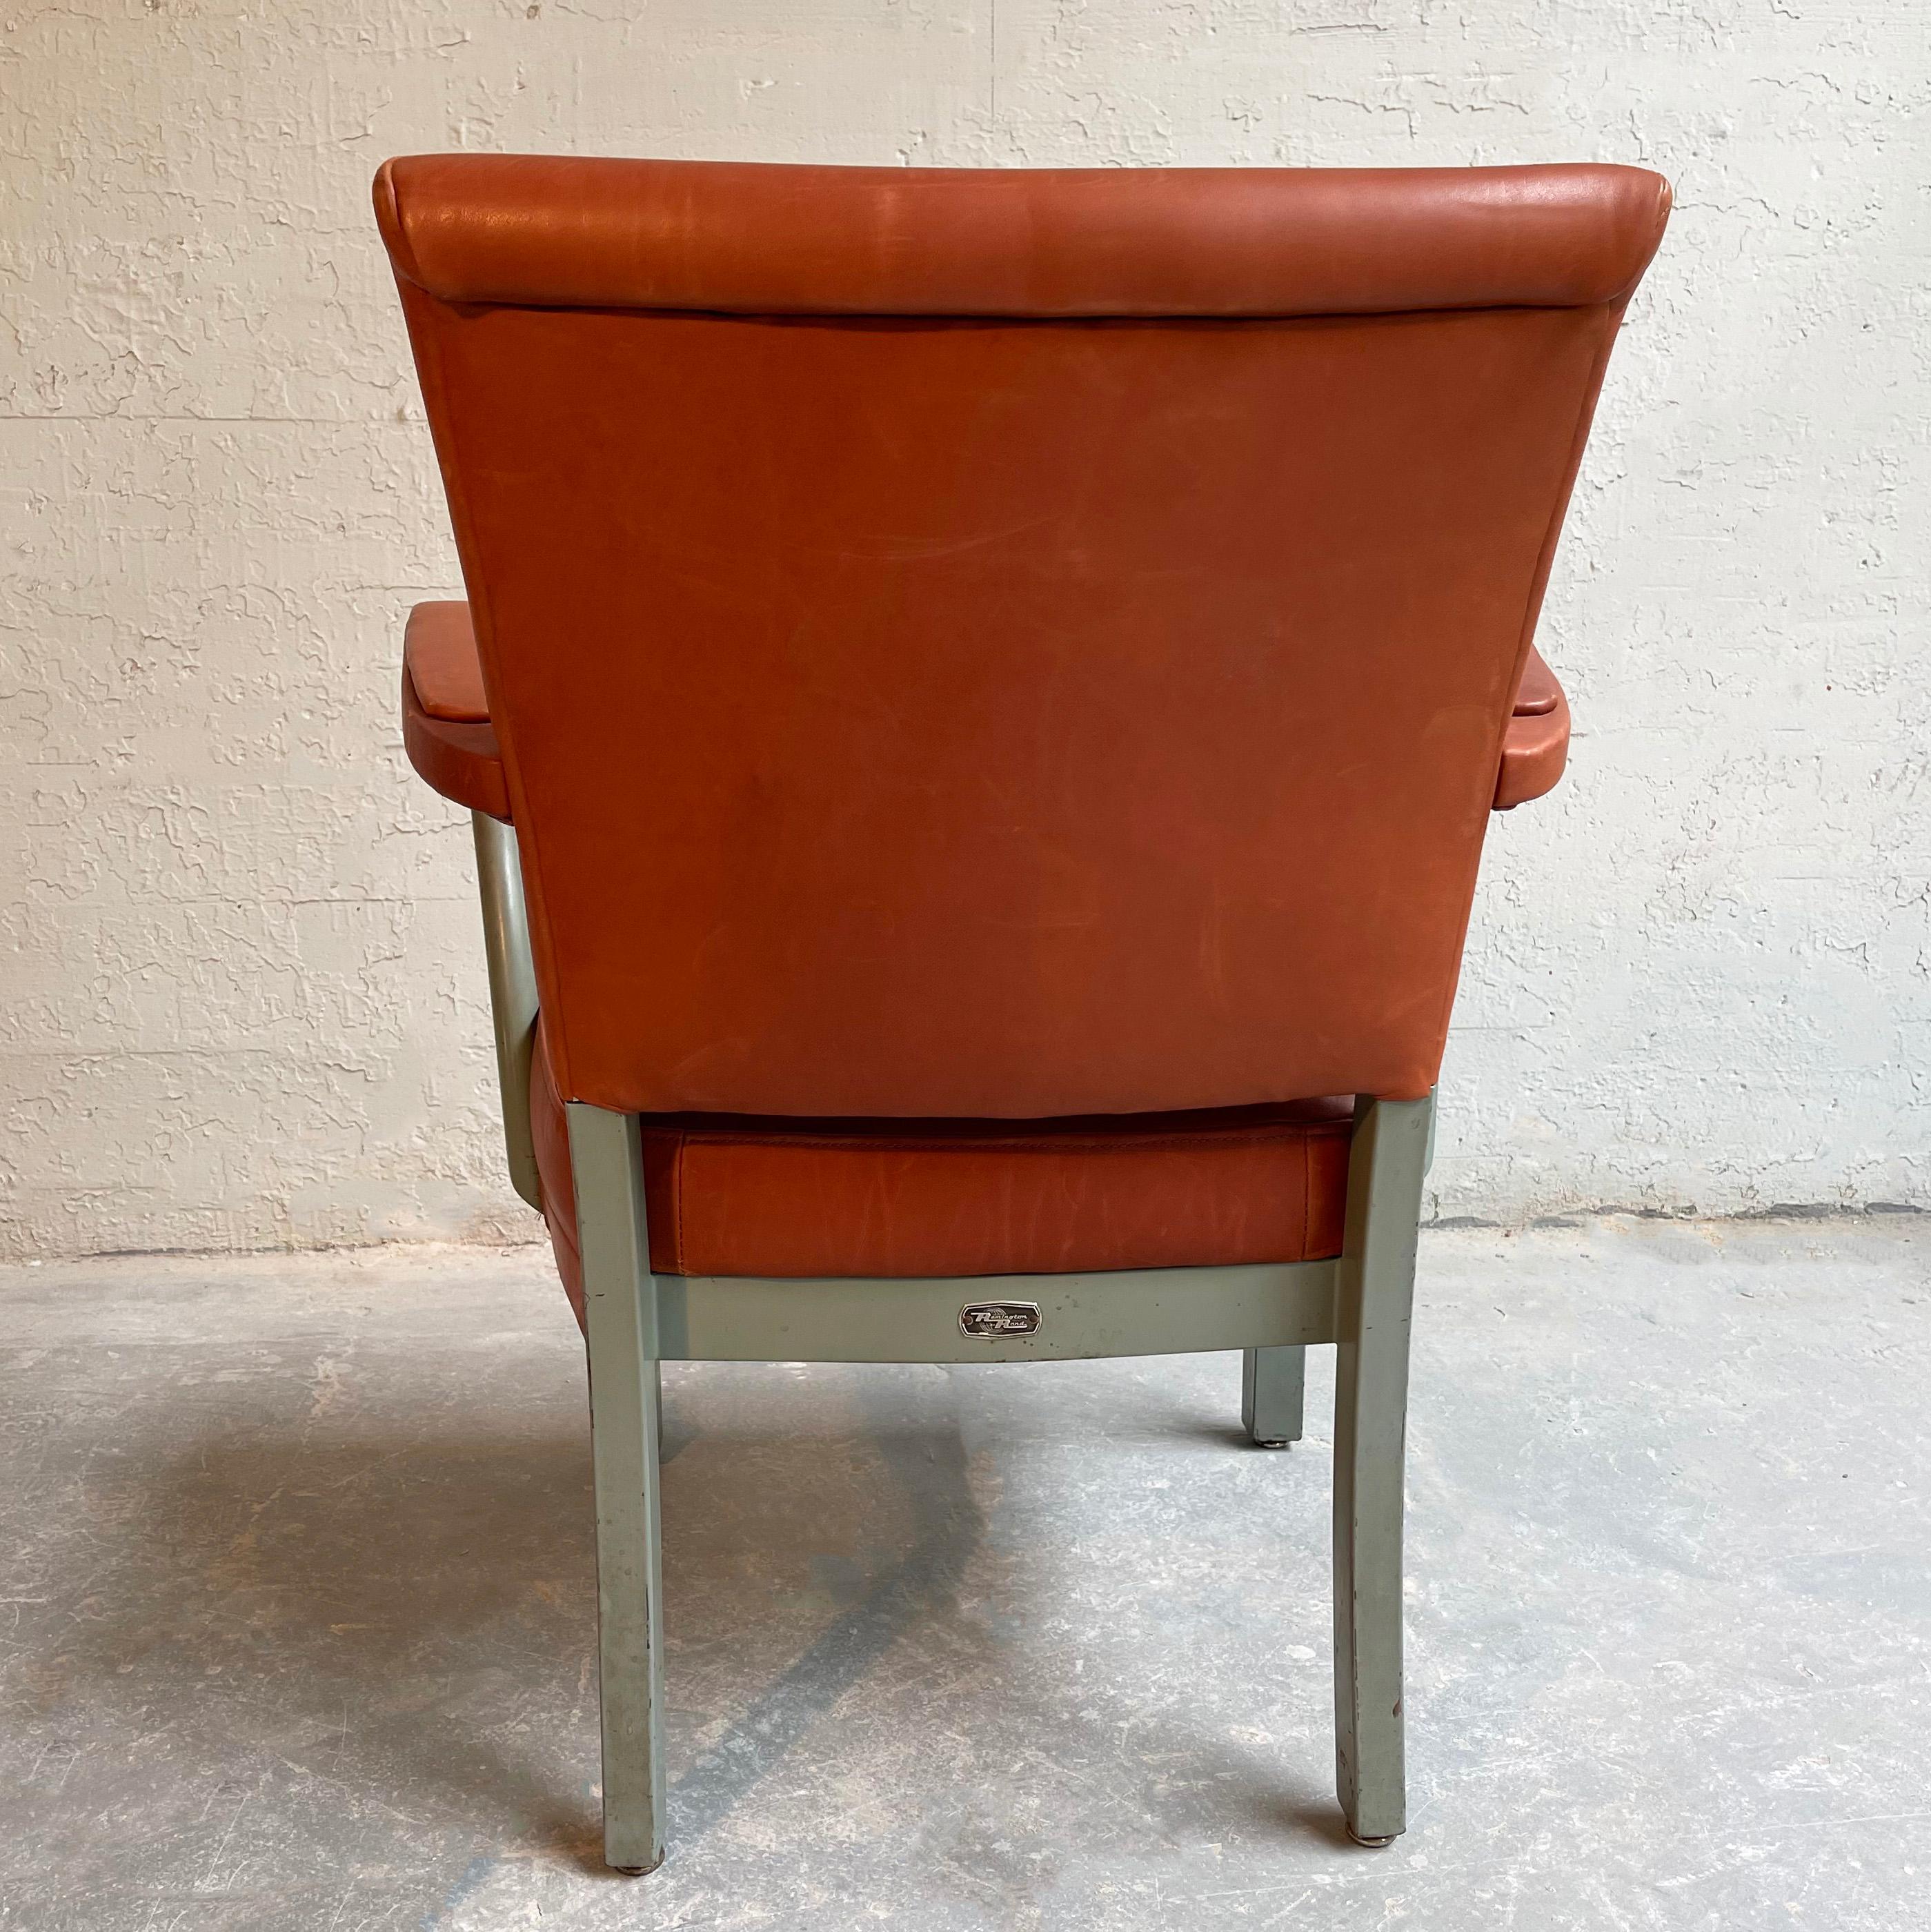 Steel Midcentury Leather Office Armchair by Remington Rand